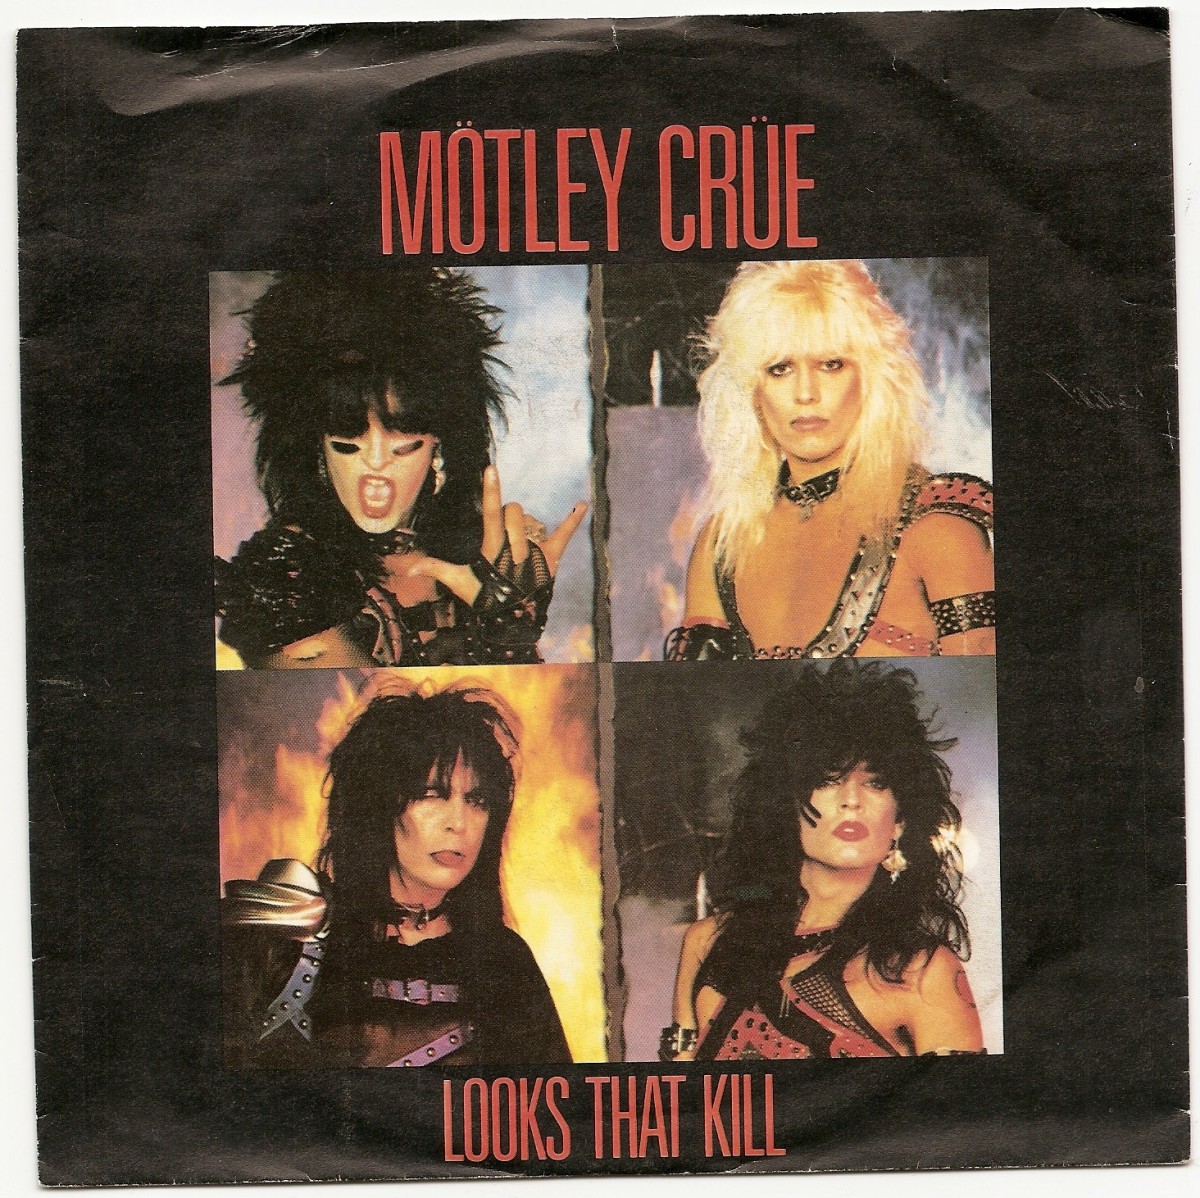 Formed in Los Angeles, Mötley Crüe took the glam metal look to the extreme.